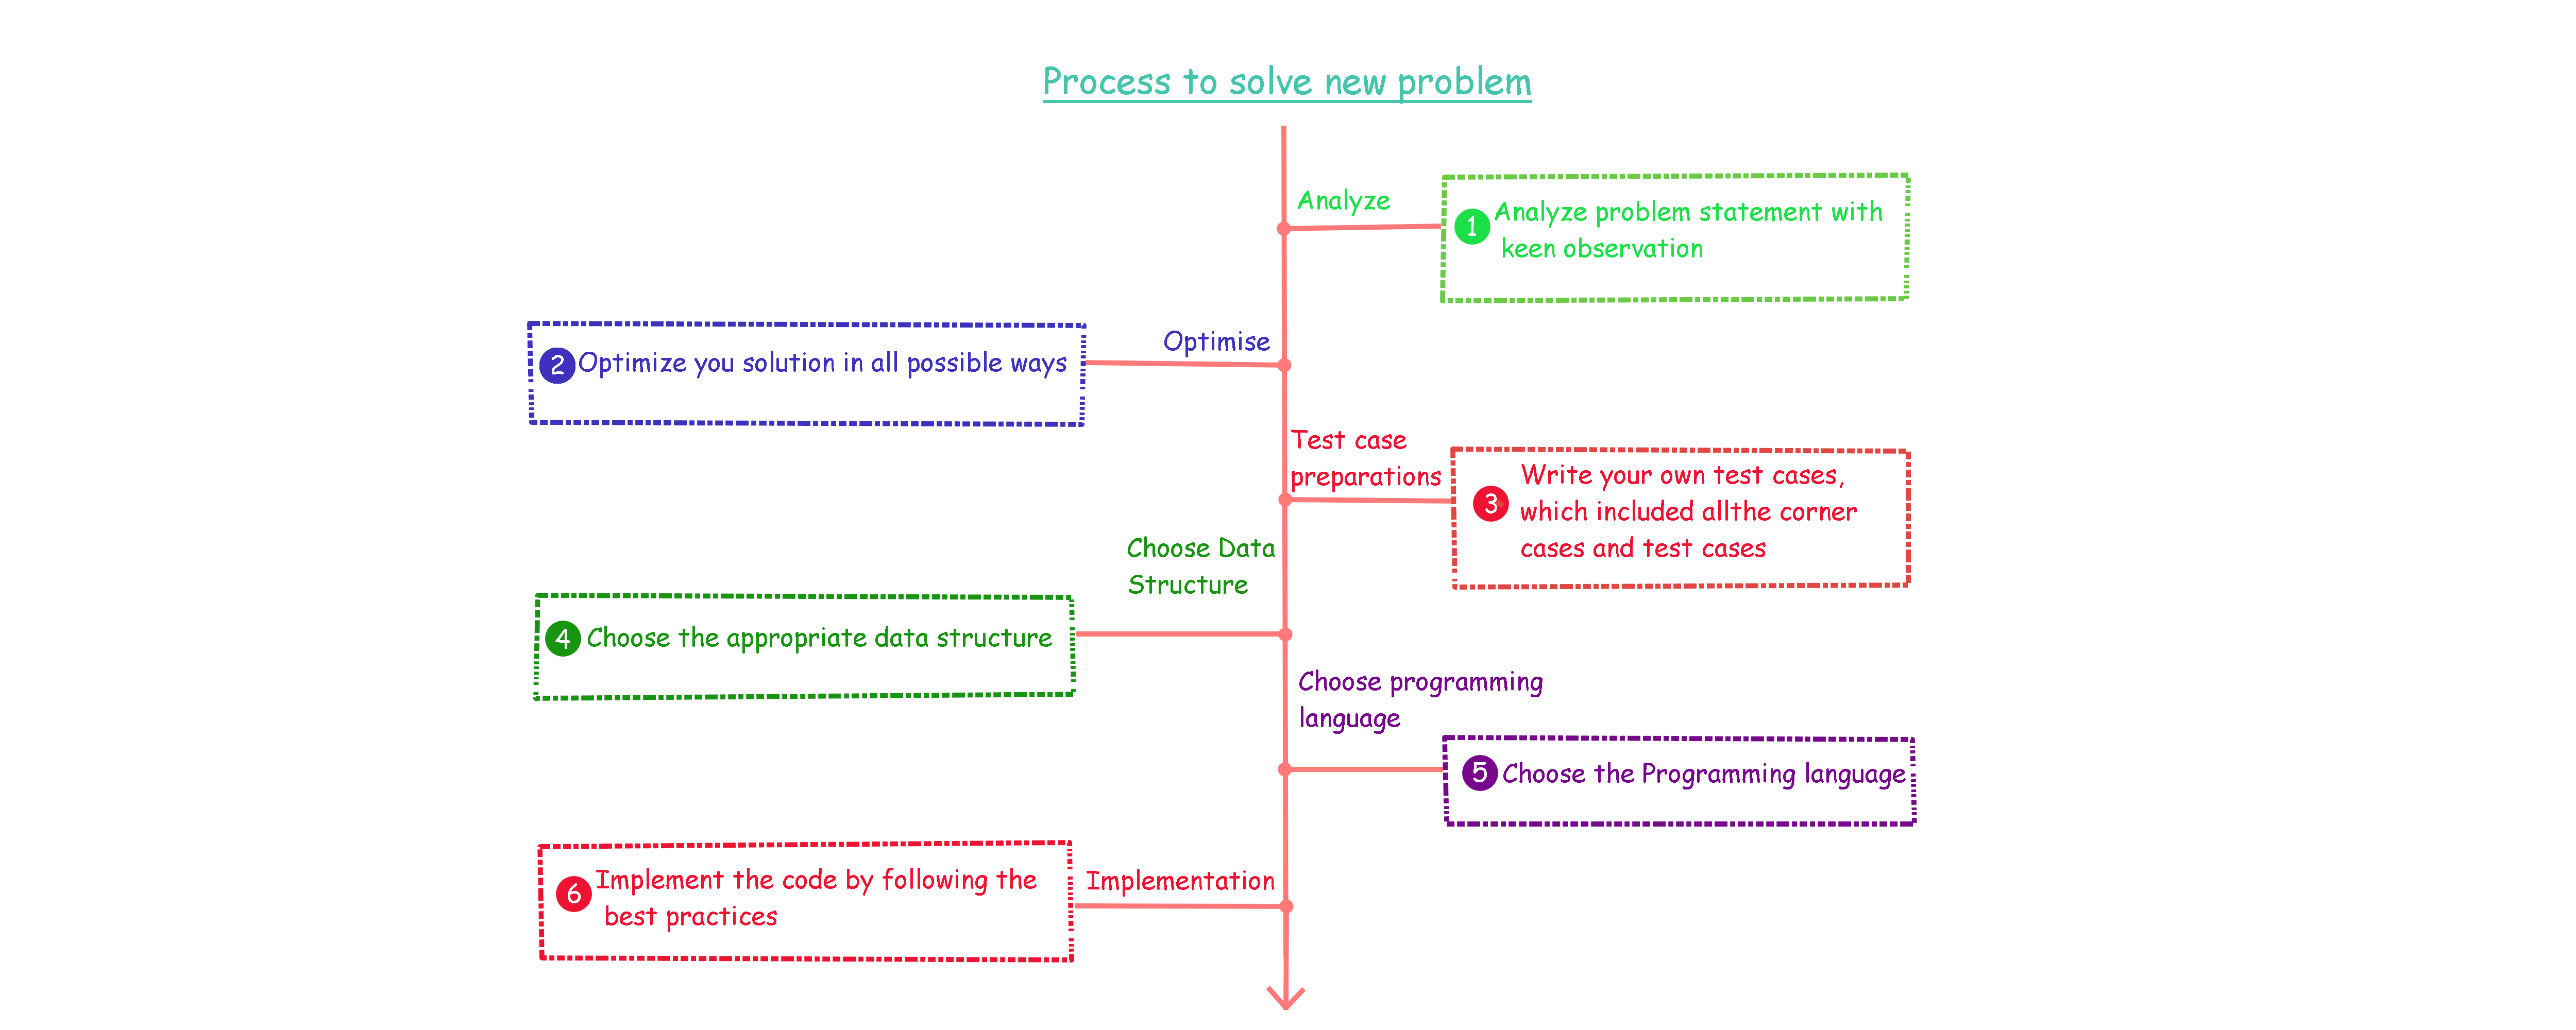 Step by step procedure for efficient solution